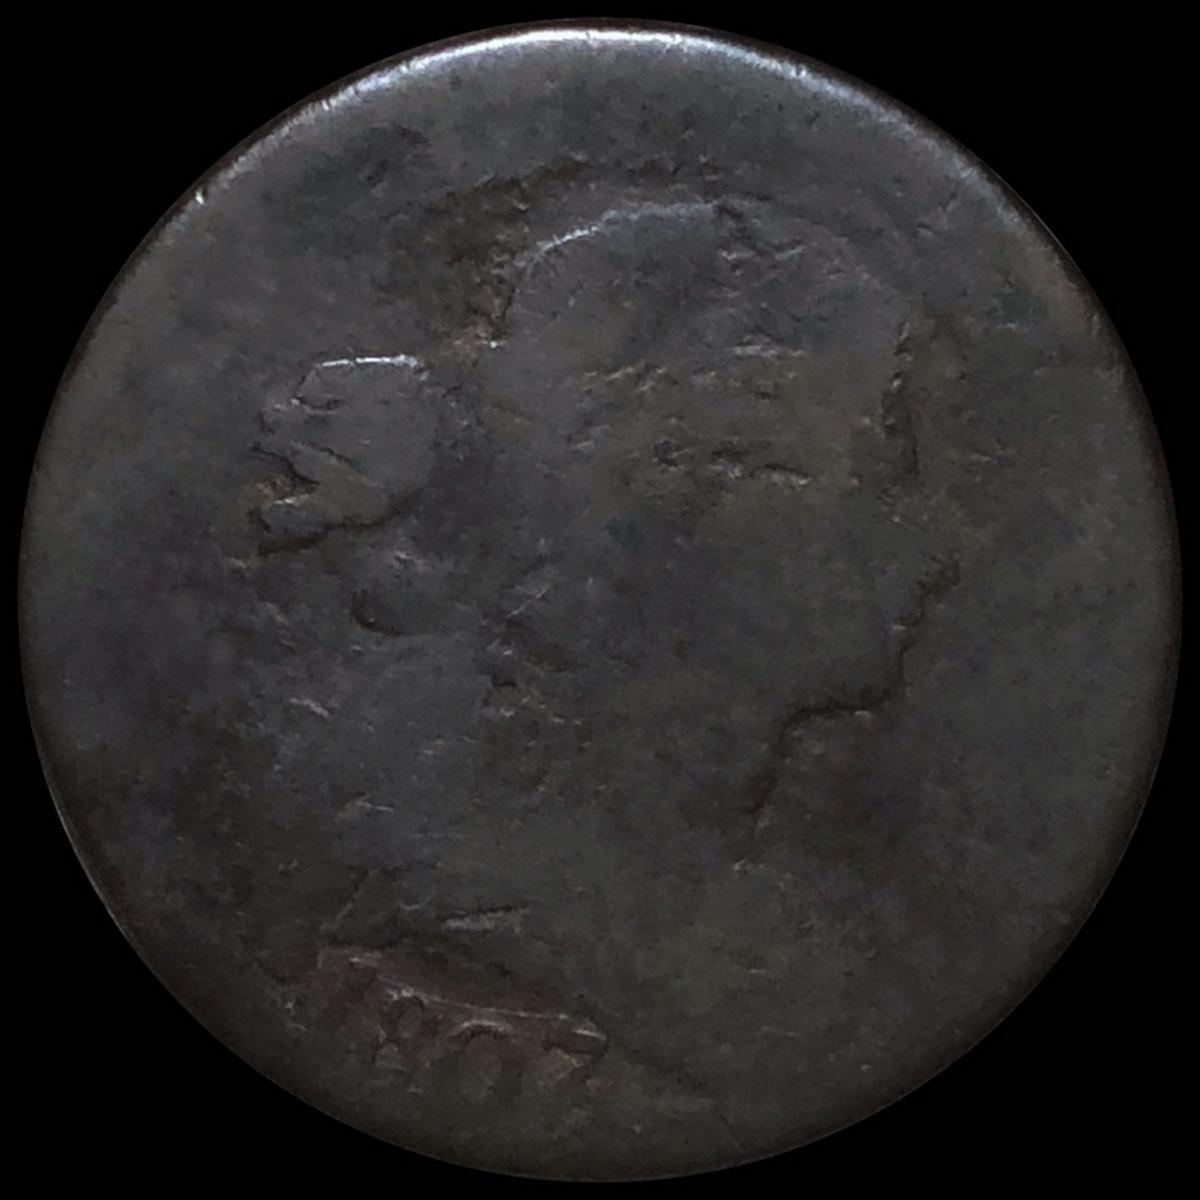 1807 Draped Bust Large Cent NICELY CIRCULATED